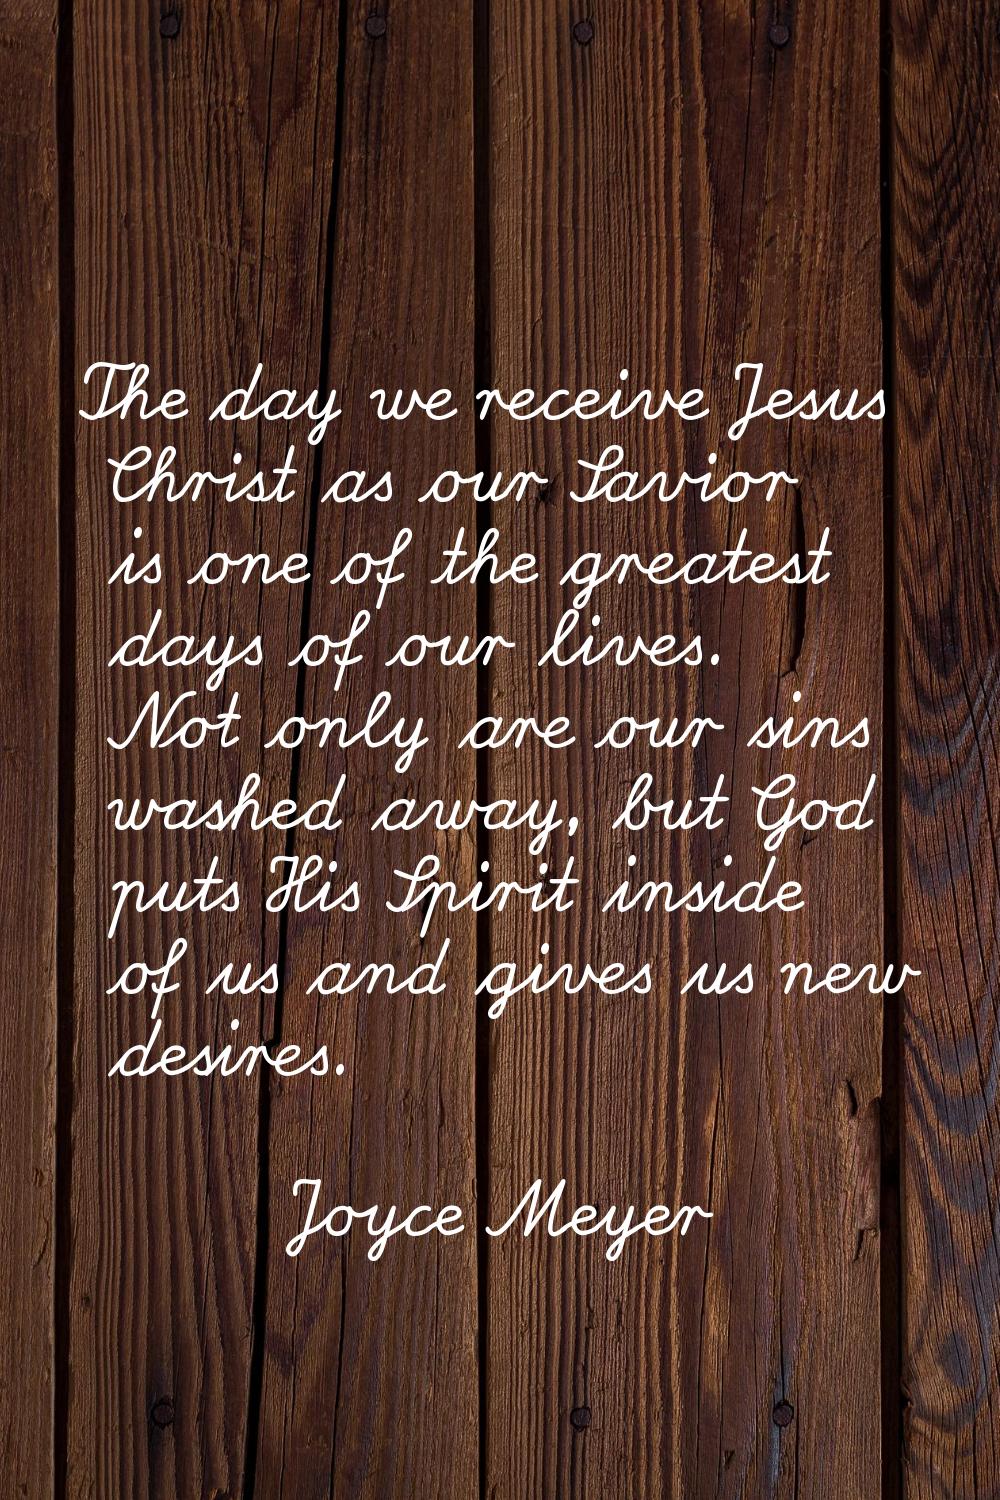 The day we receive Jesus Christ as our Savior is one of the greatest days of our lives. Not only ar